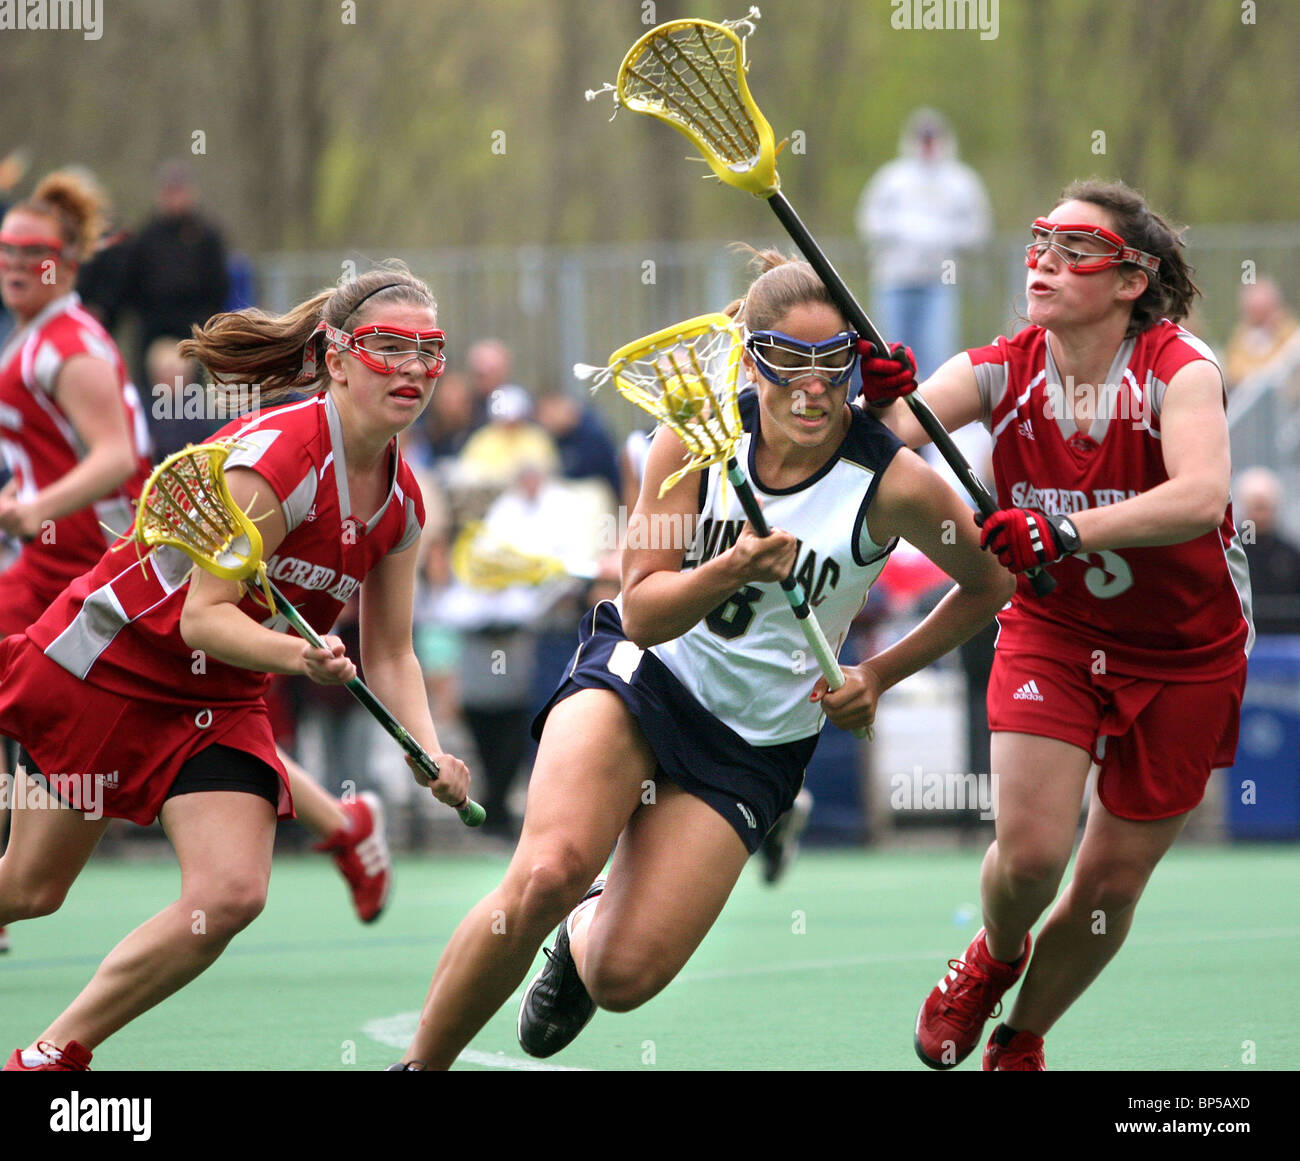 Women's College Lacrosse action in Connecticut USA Stock Photo